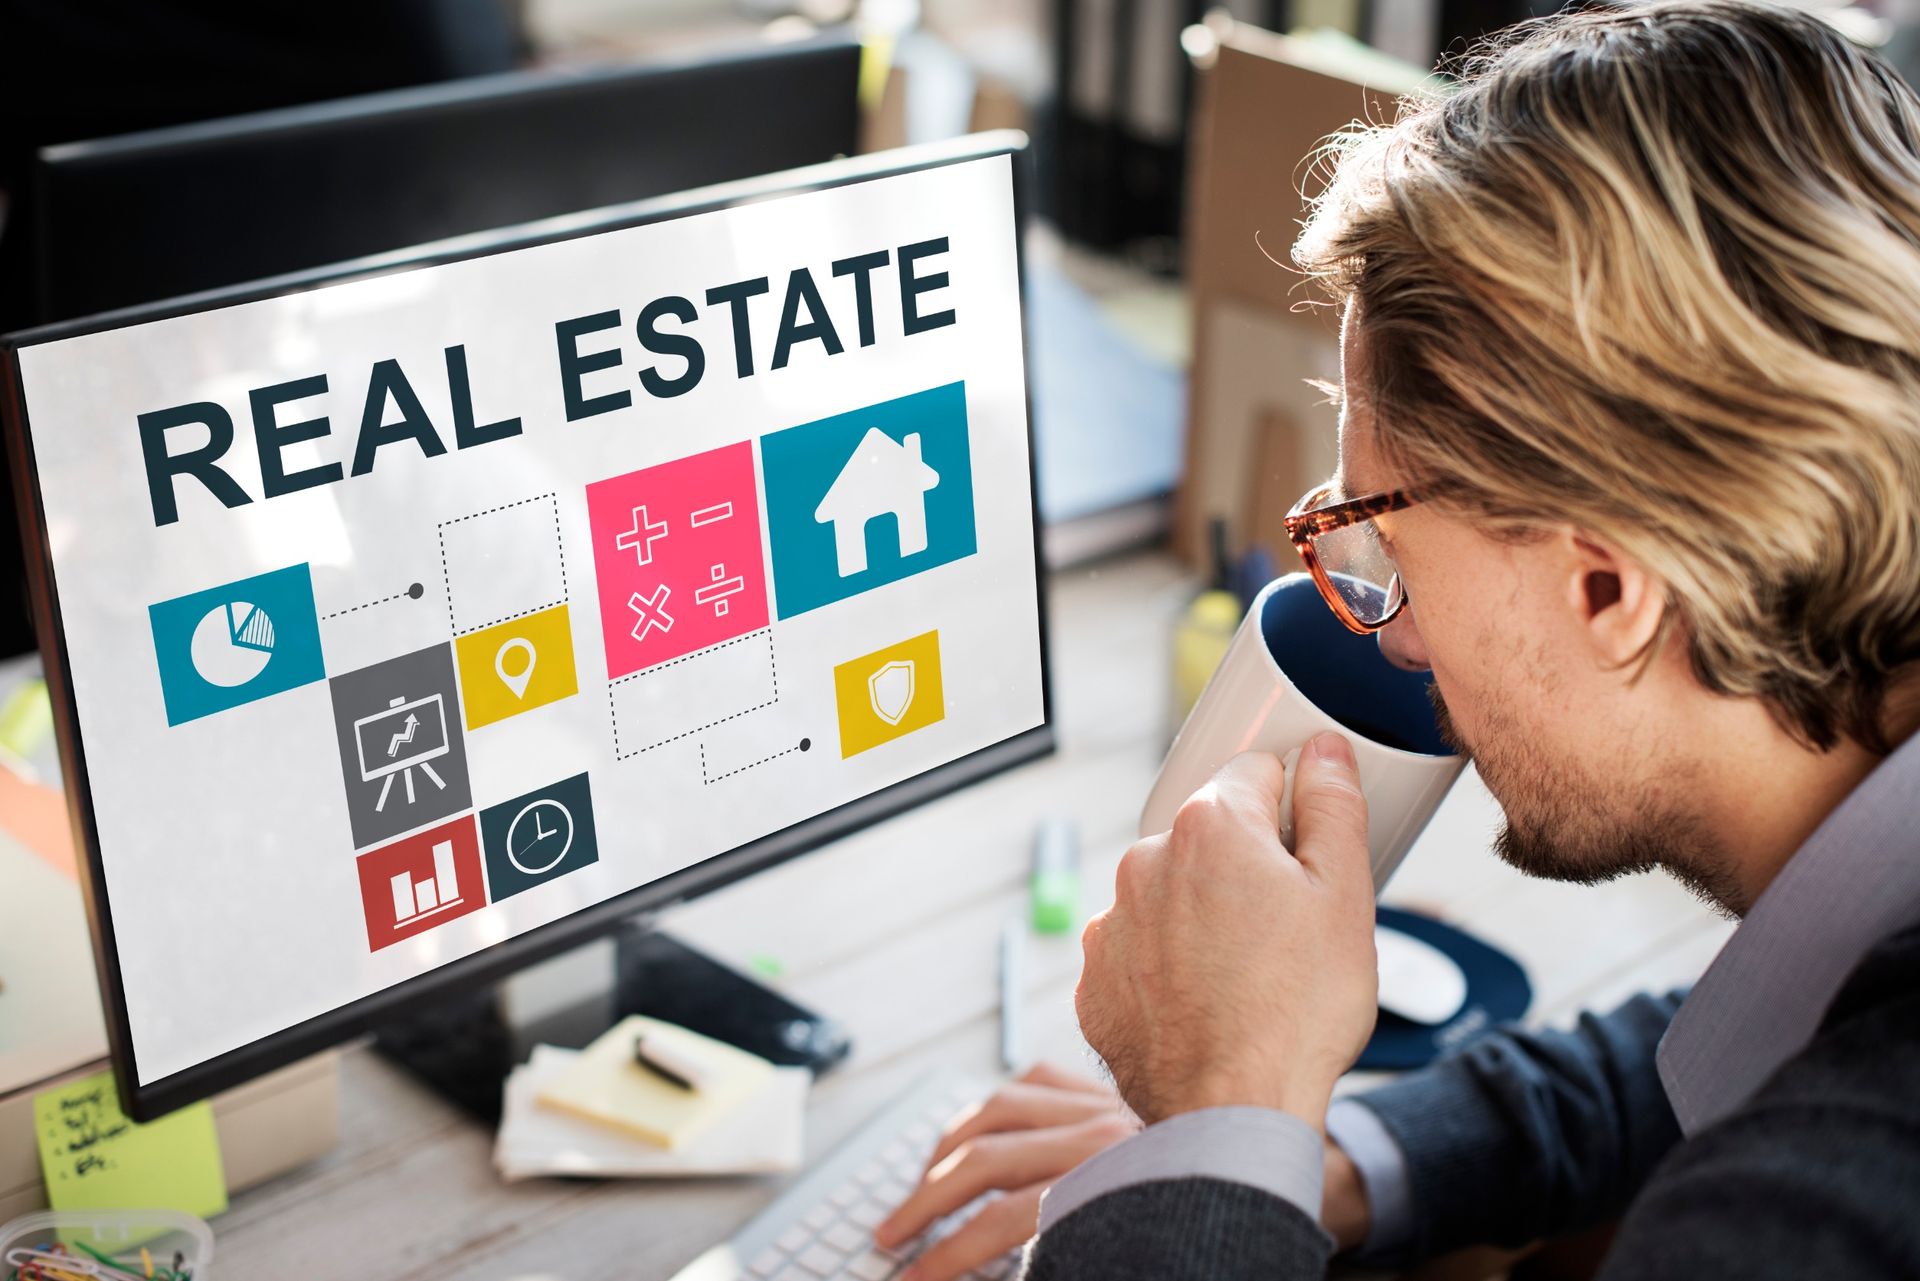 6 Real Estate Social Media Post Ideas to Get New Clients